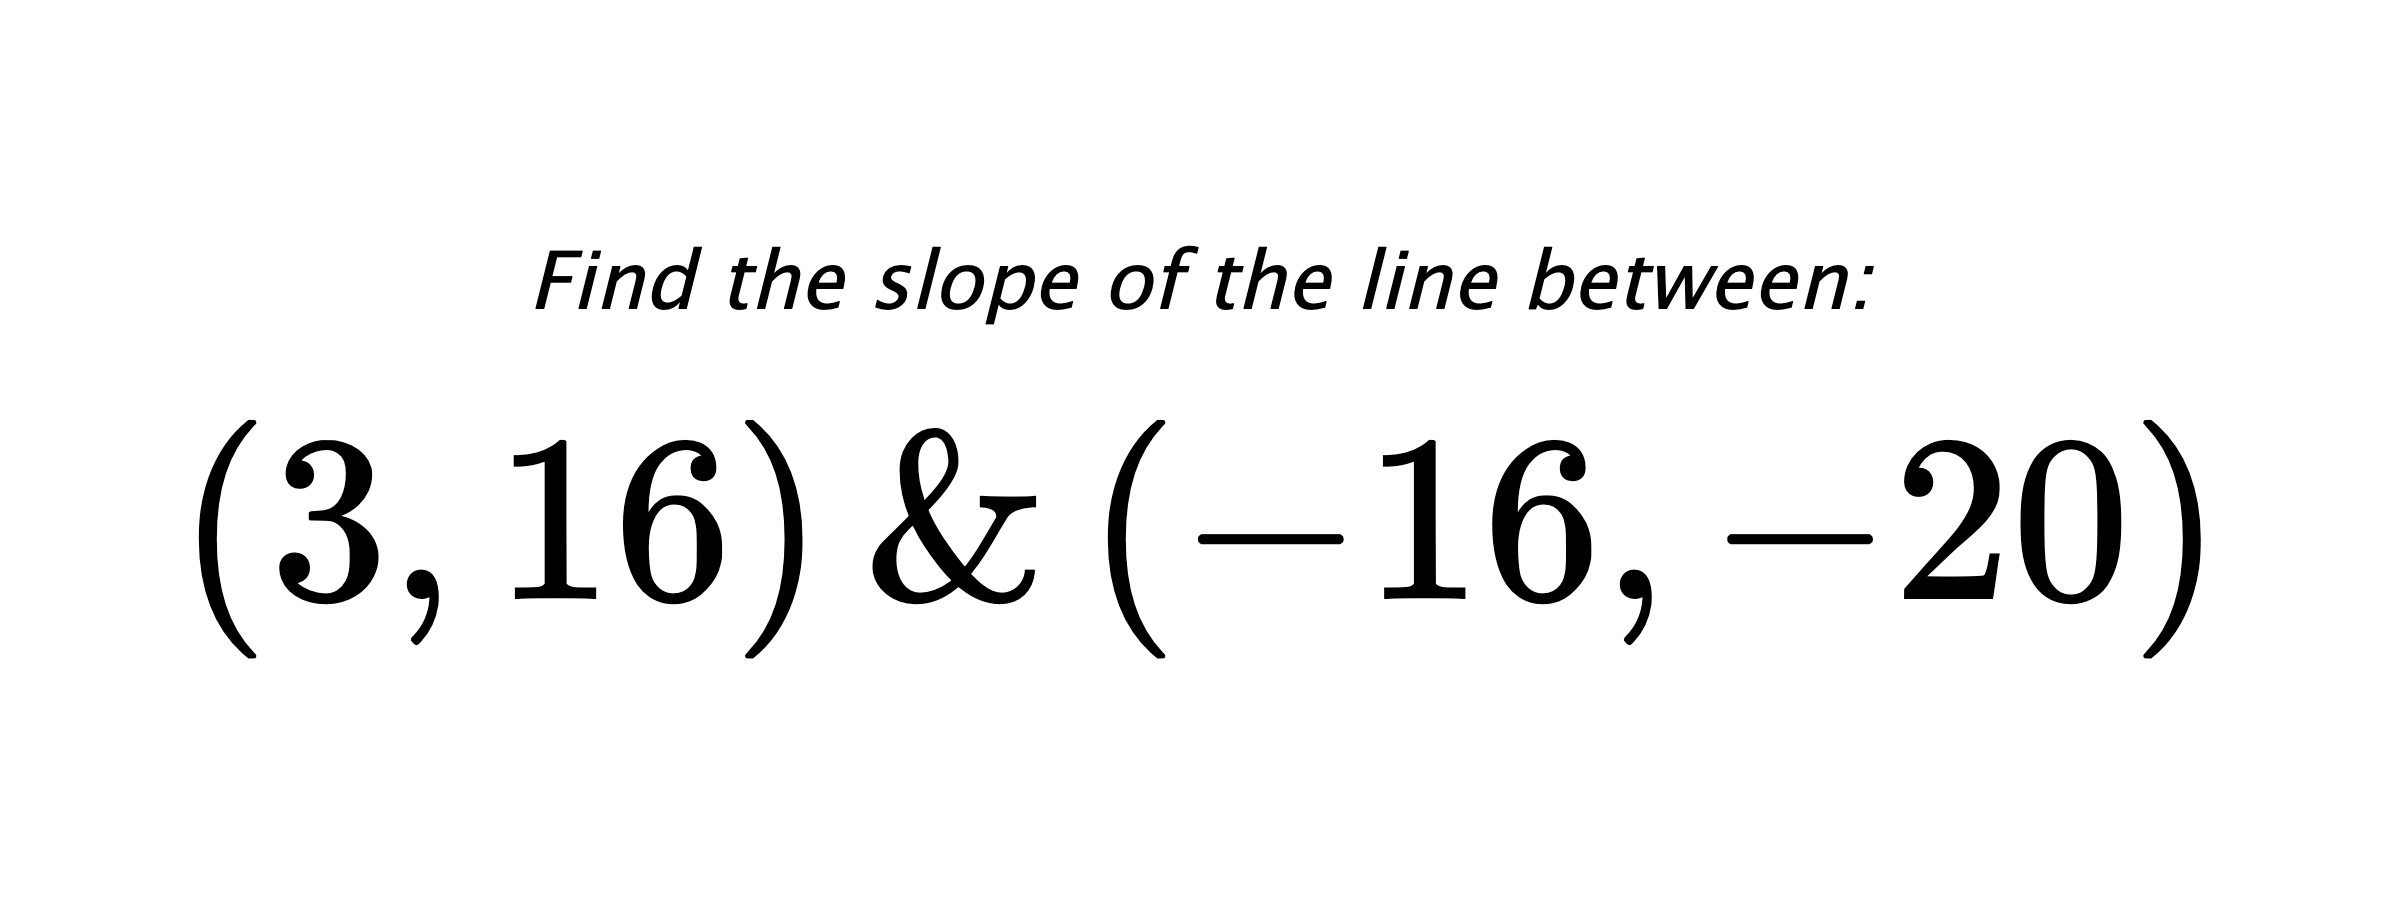 Find the slope of the line between: $ (3,16) \hspace{0.5cm} \text{&} \hspace{0.5cm} (-16,-20) $